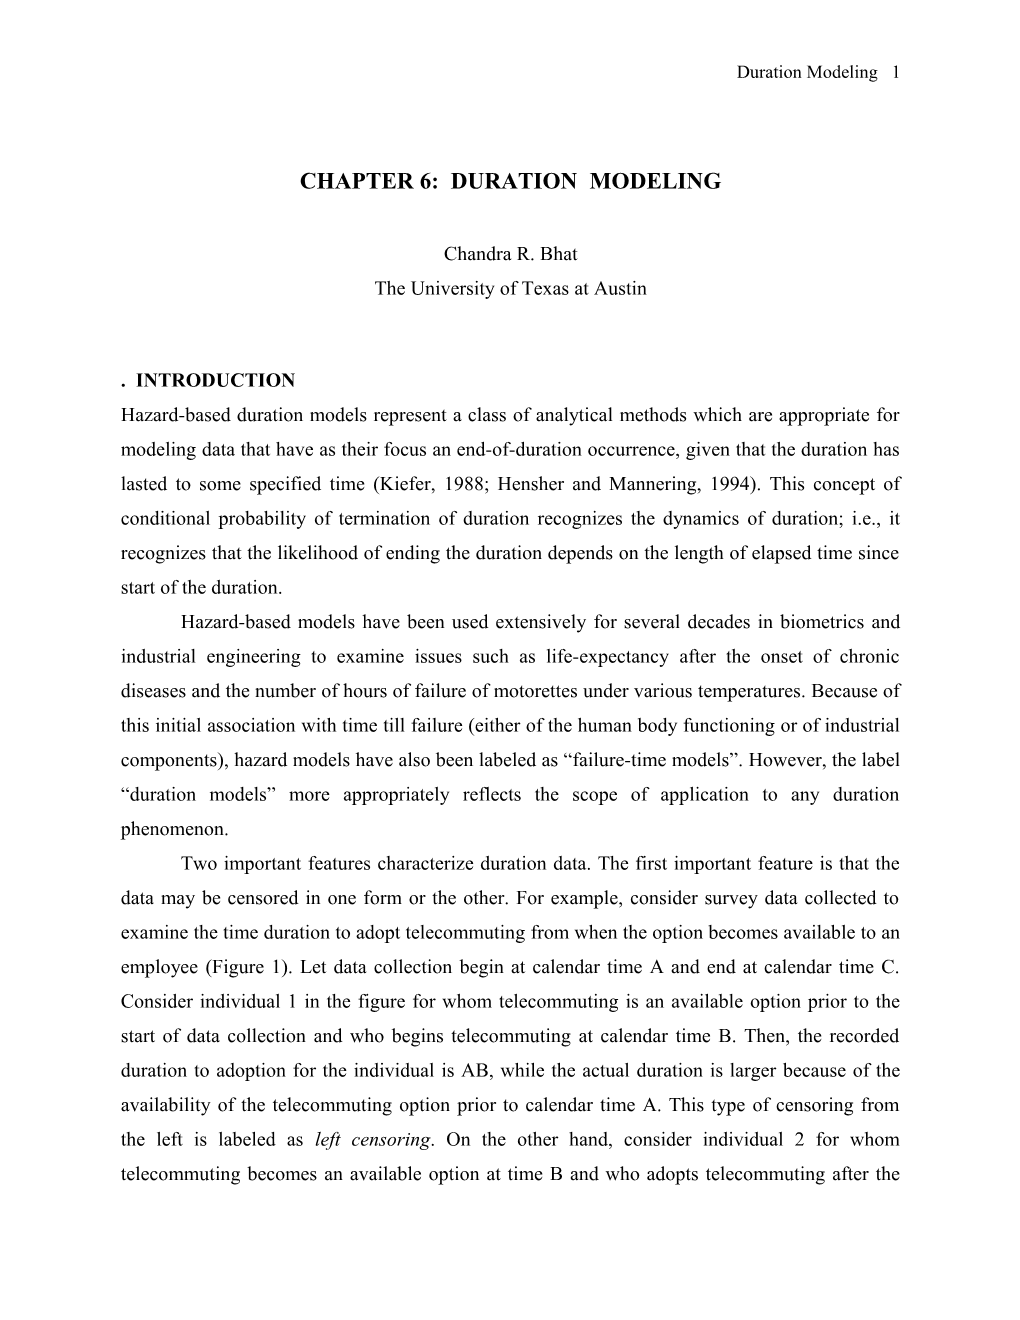 Chapter 6: Duration Modeling